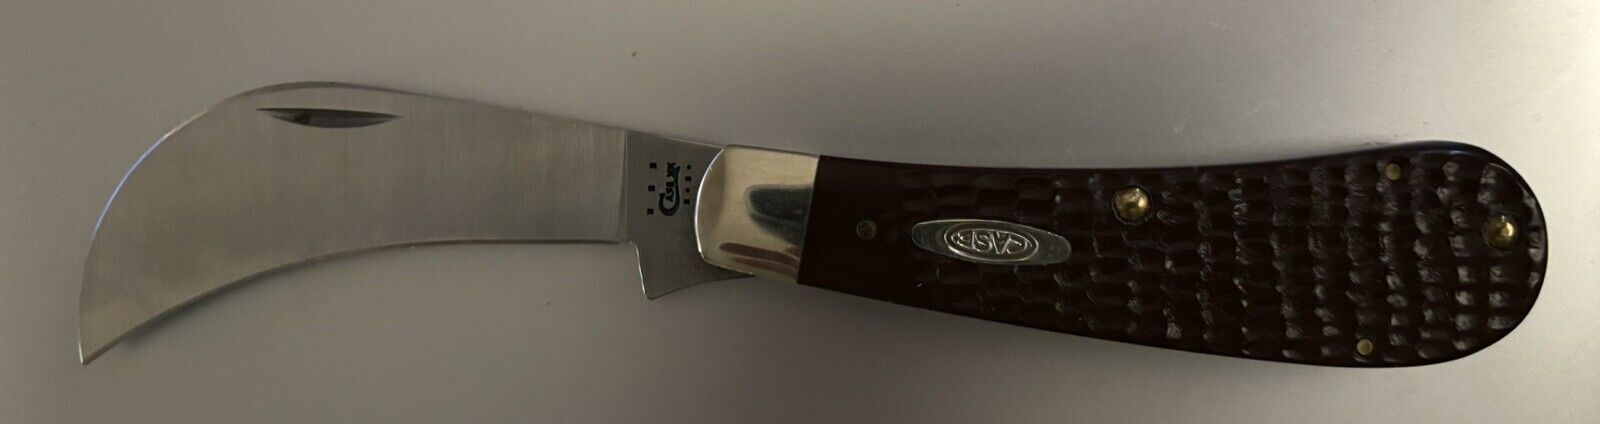 A+ Rare Unique Brown Case Knife Limited # Pruning Knife Same Day Shipping Nice